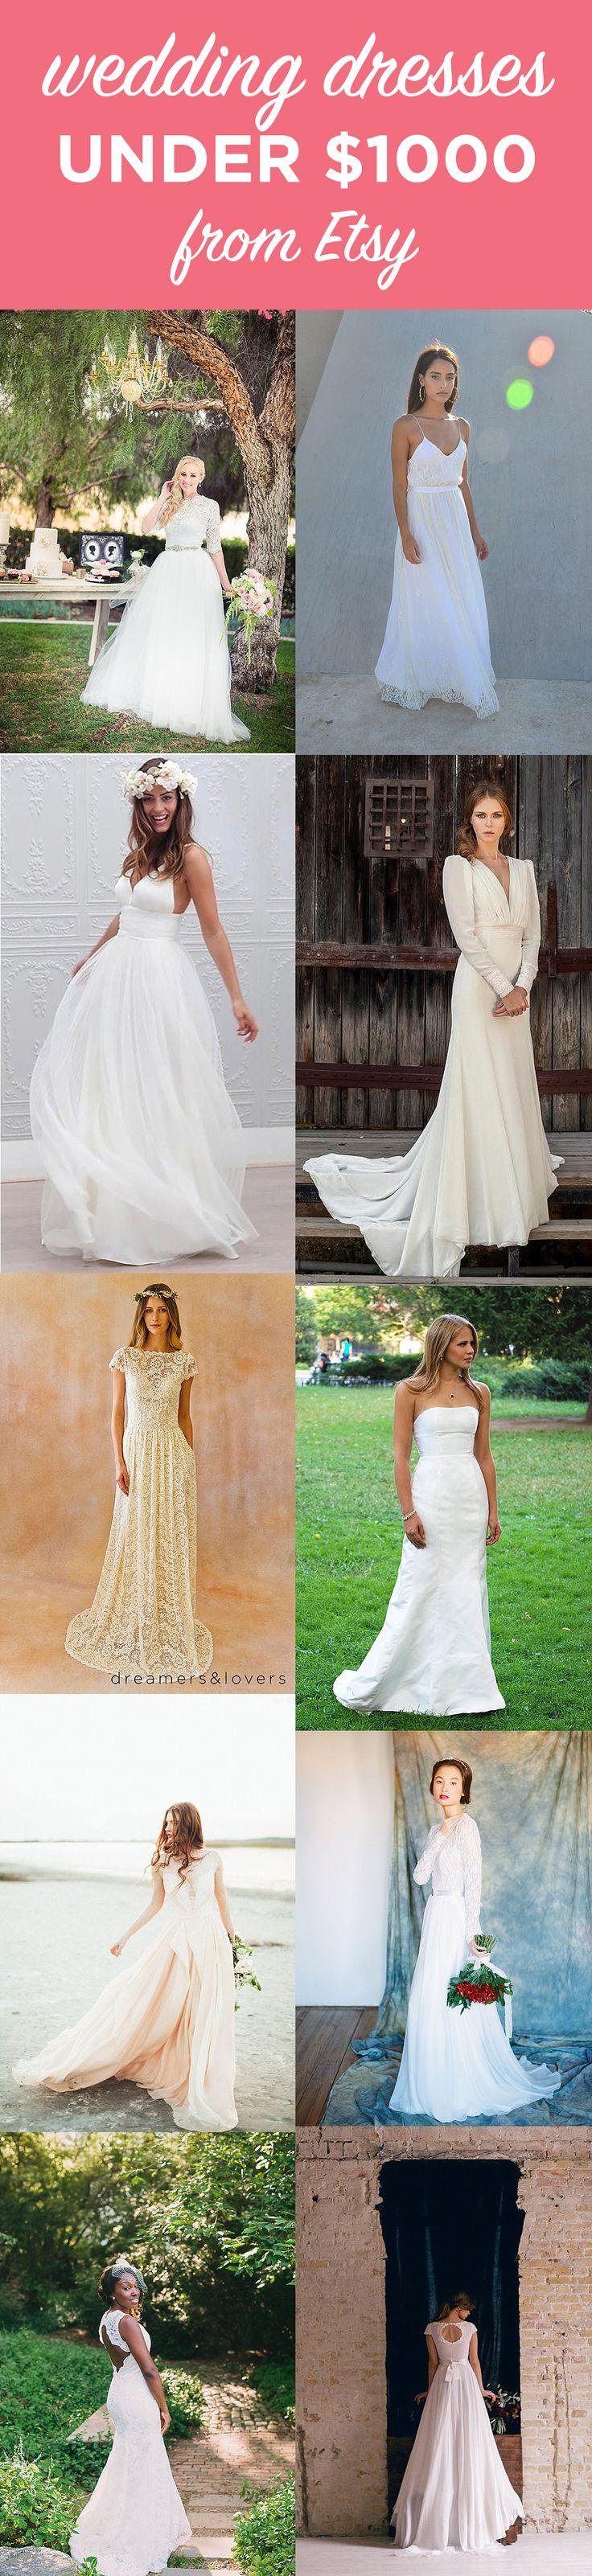 Wedding - 10 Gorgeous Wedding Gowns Under $1000 From Etsy